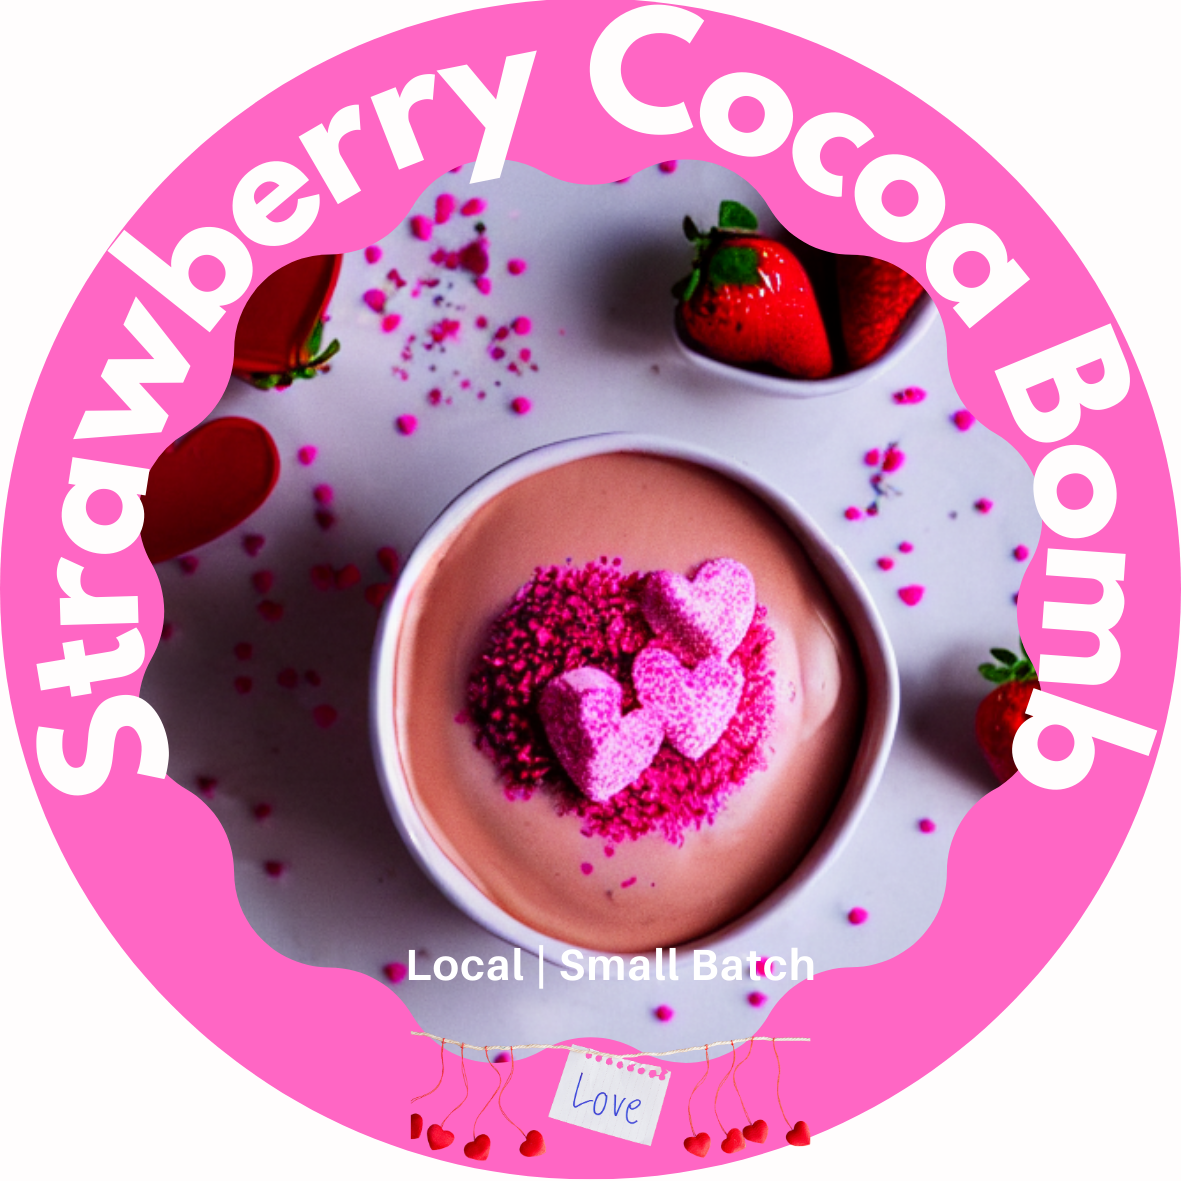 Strawberry Cocoa Bomb | Limited until Valentines Week